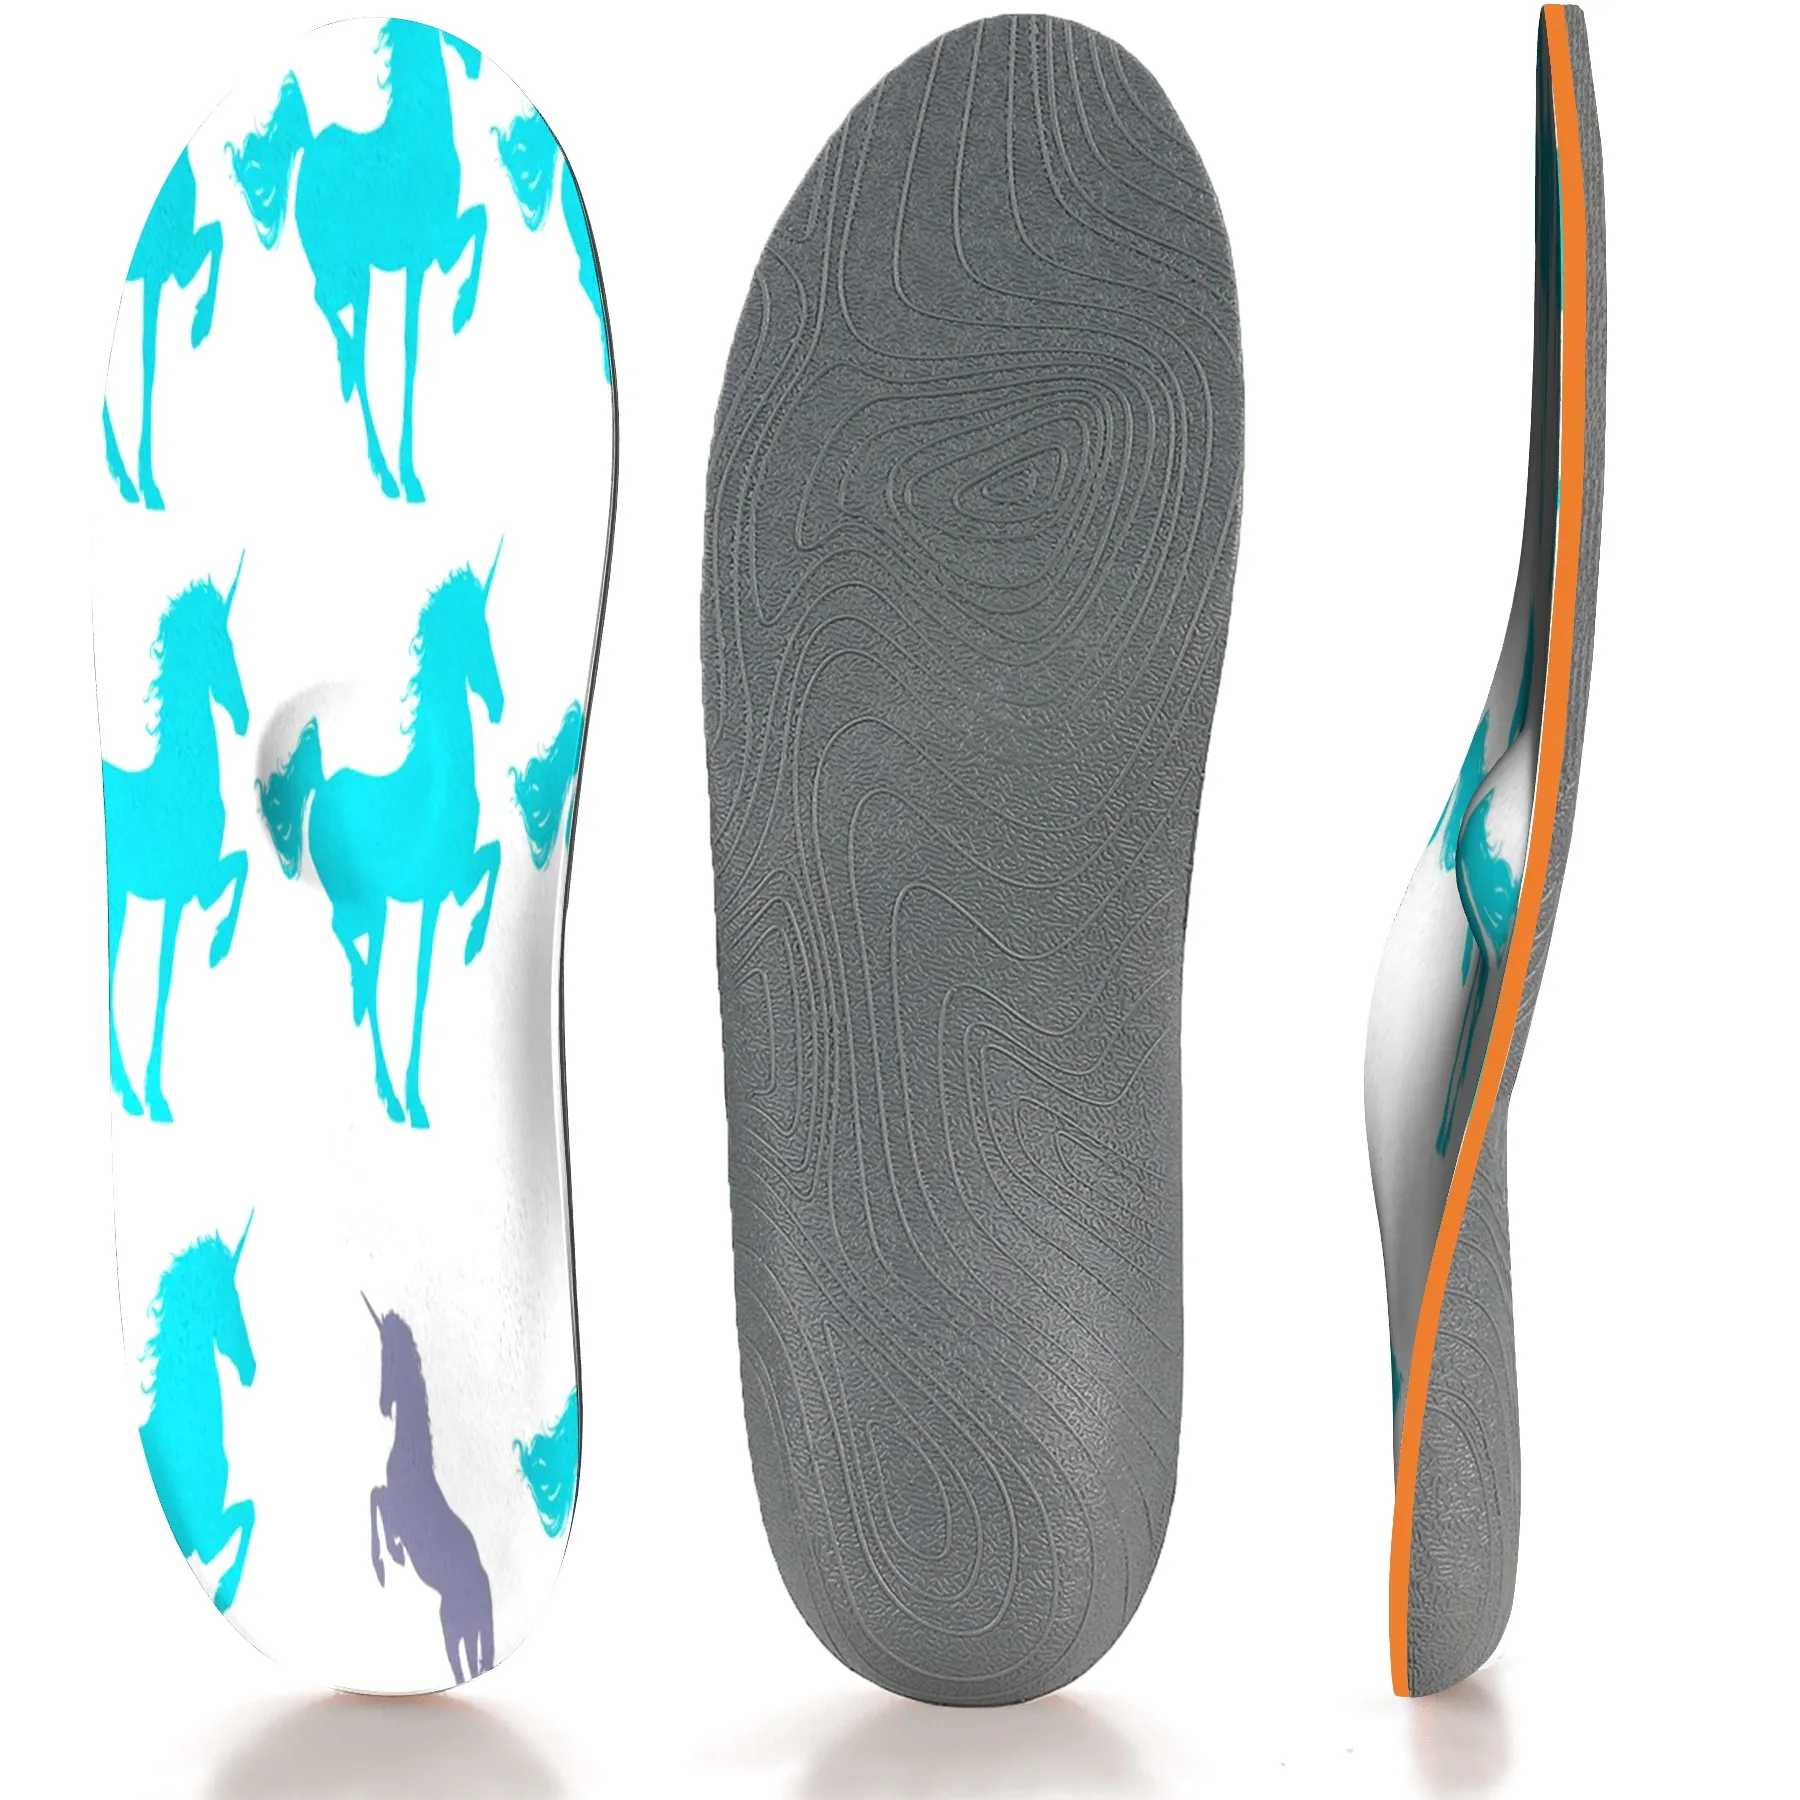 Flat Feet Arch Support Orthopedic Insert Insoles Heated Template Sneakers Cushion Men Plantar Fasciitis Heel Pain Boots Shoes